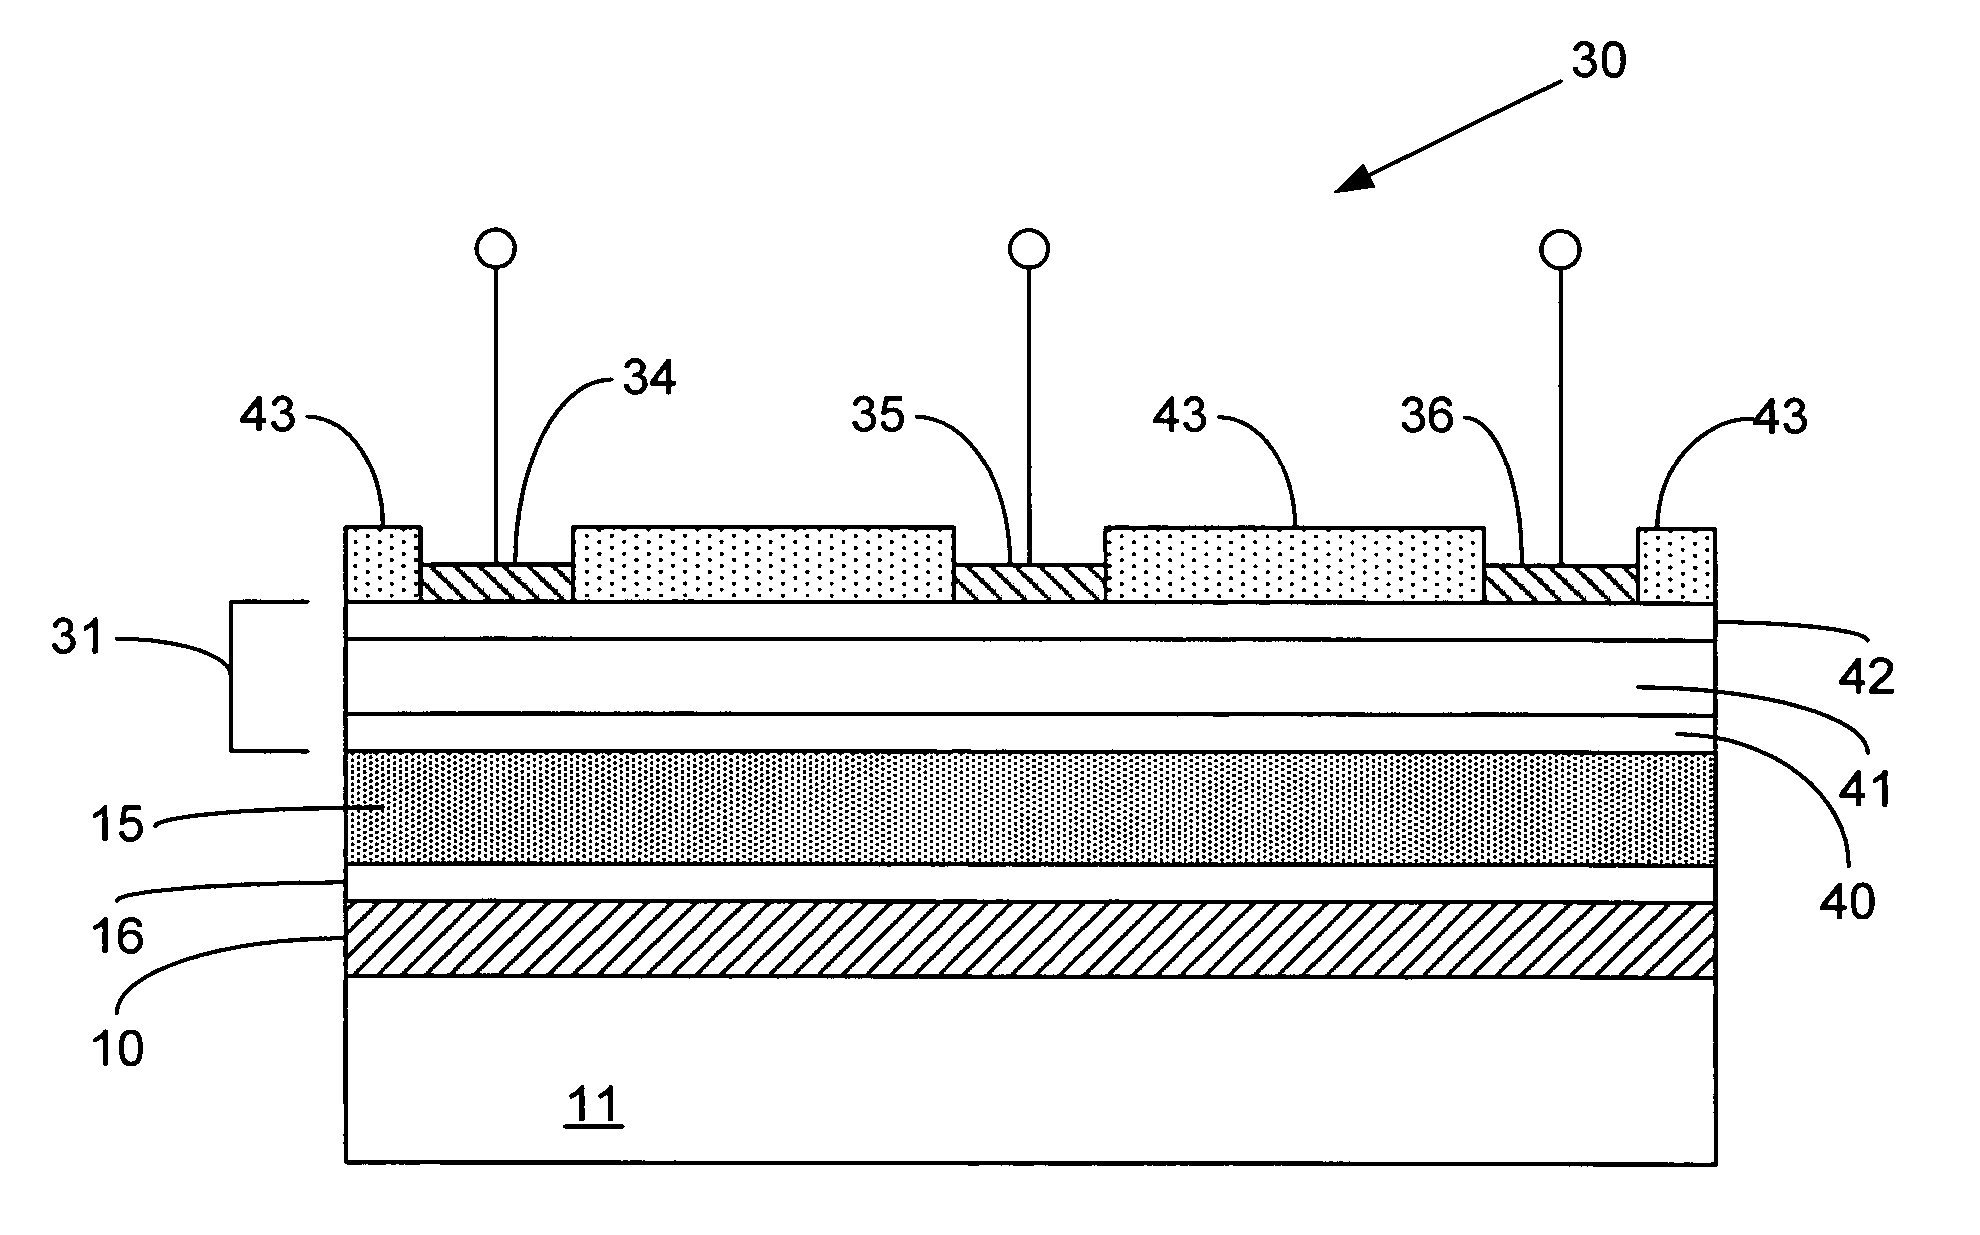 Silicon carbide on diamond substrates and related devices and methods